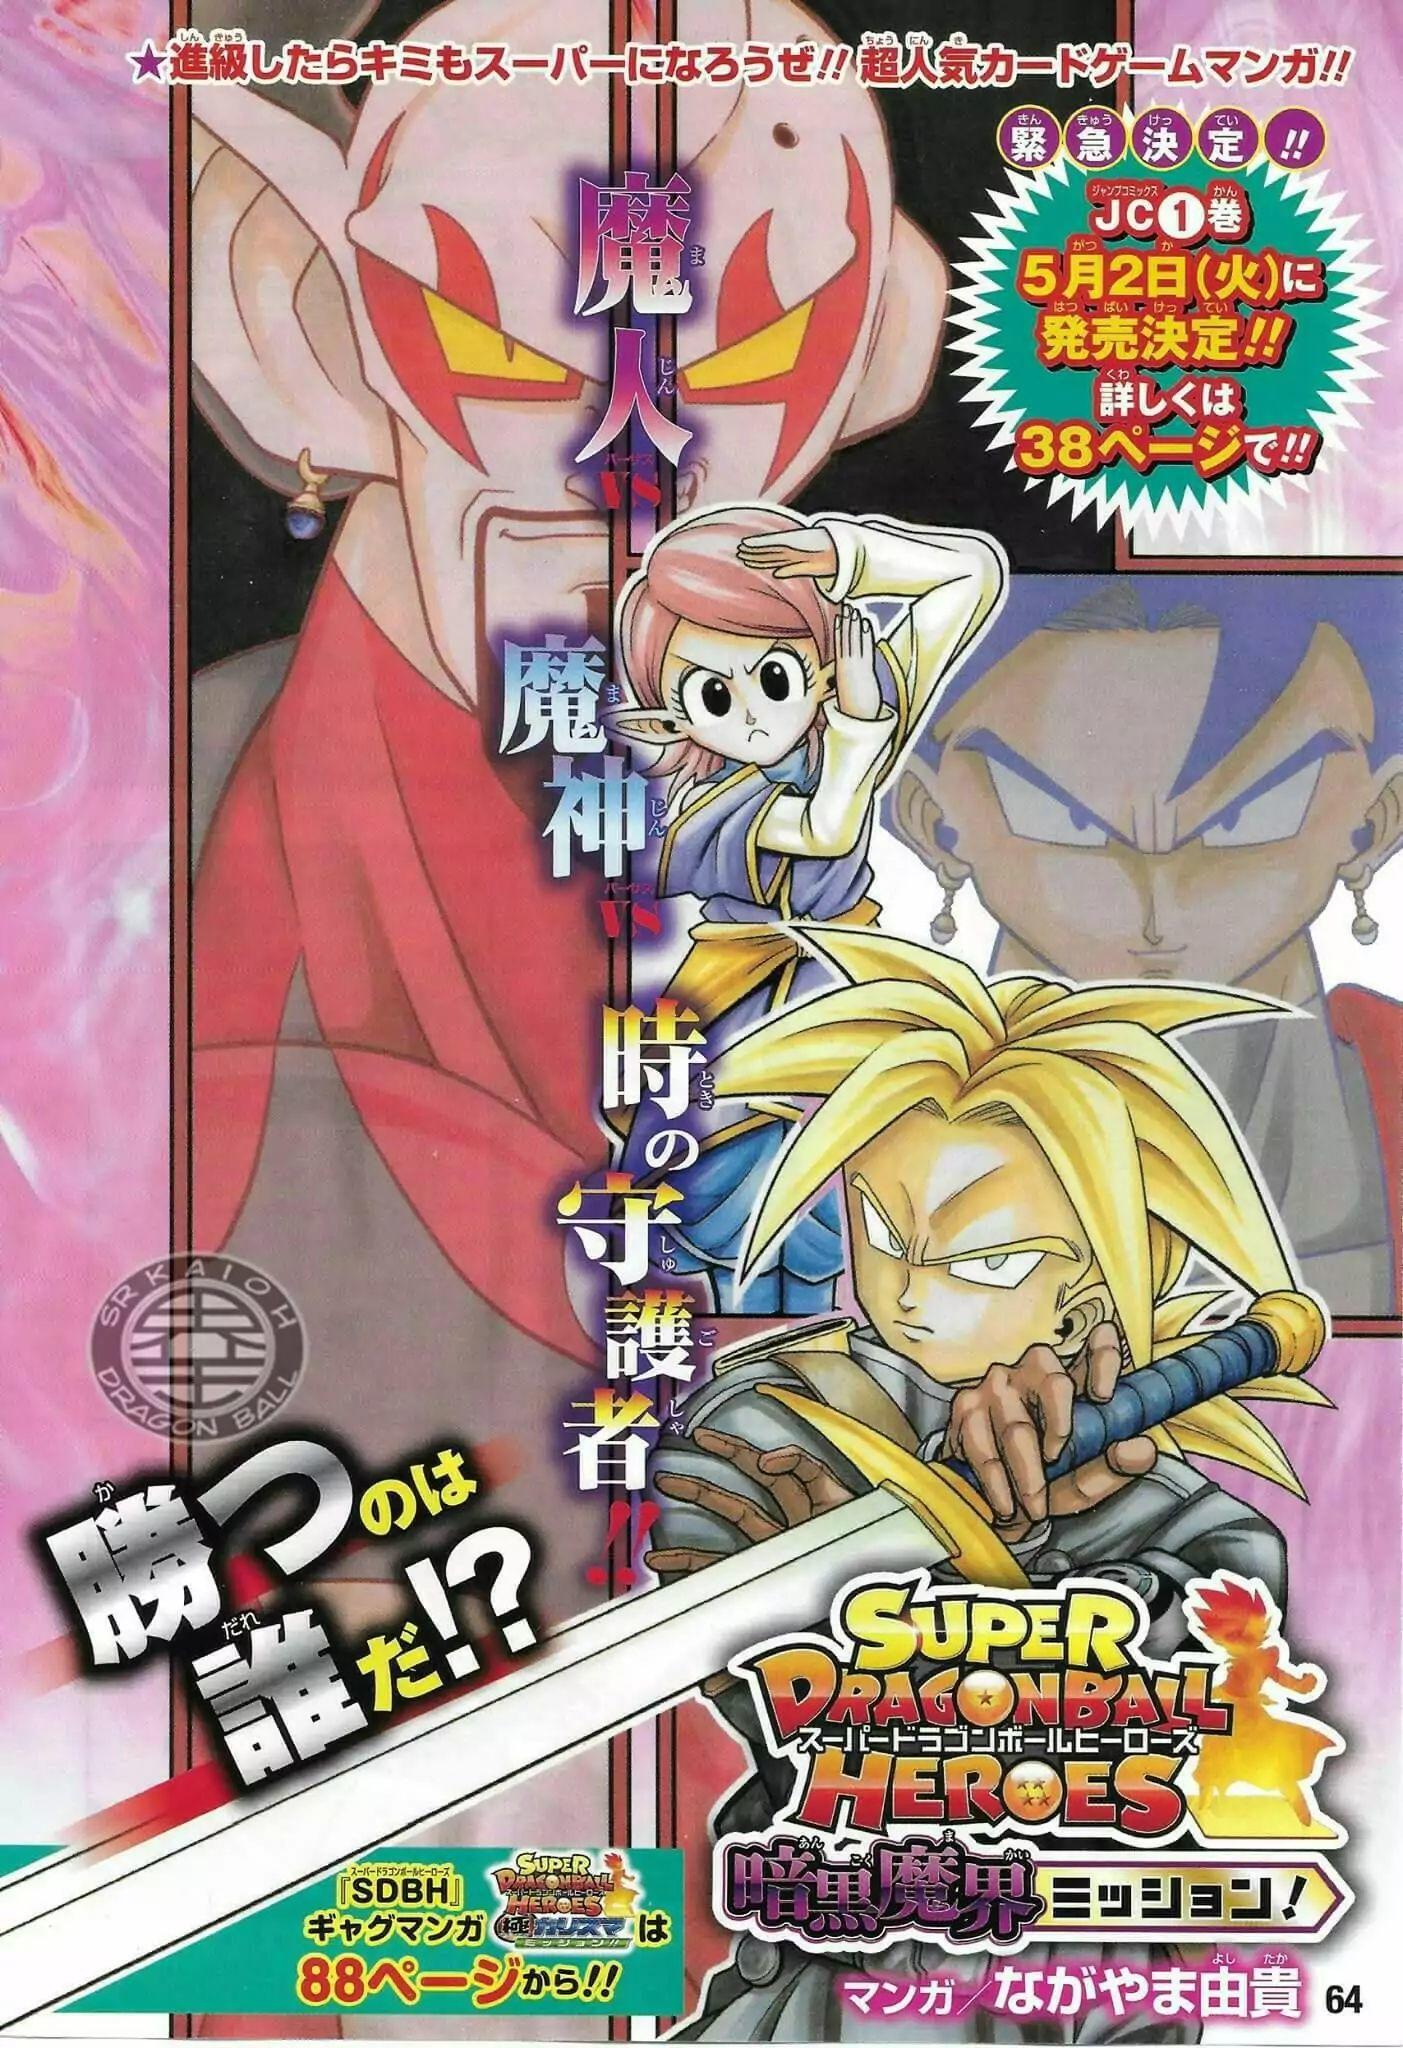 Read Super Dragon Ball Heroes: Universe Mission Chapter 1: The Experiment!  on Mangakakalot